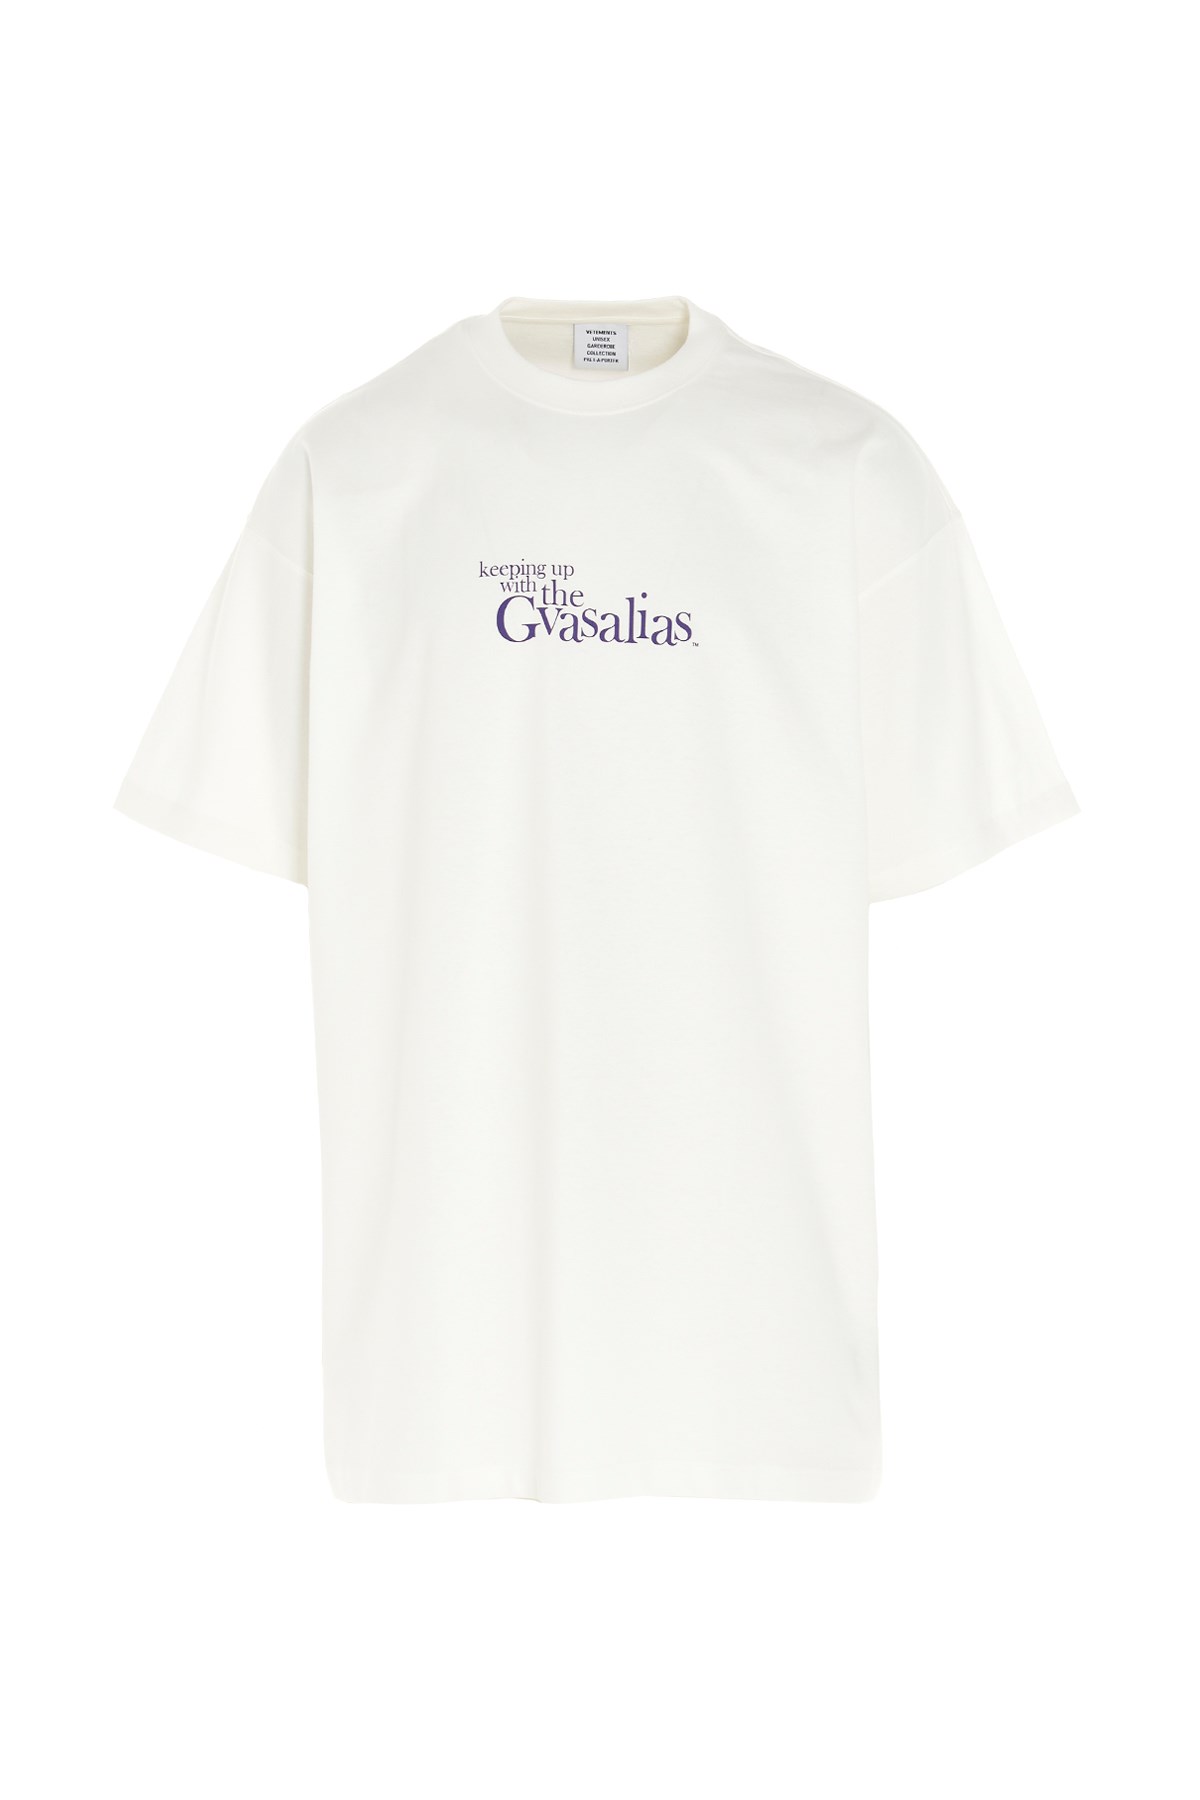 VETEMENTS T-Shirt 'Keeping Up With The Gvasalias'